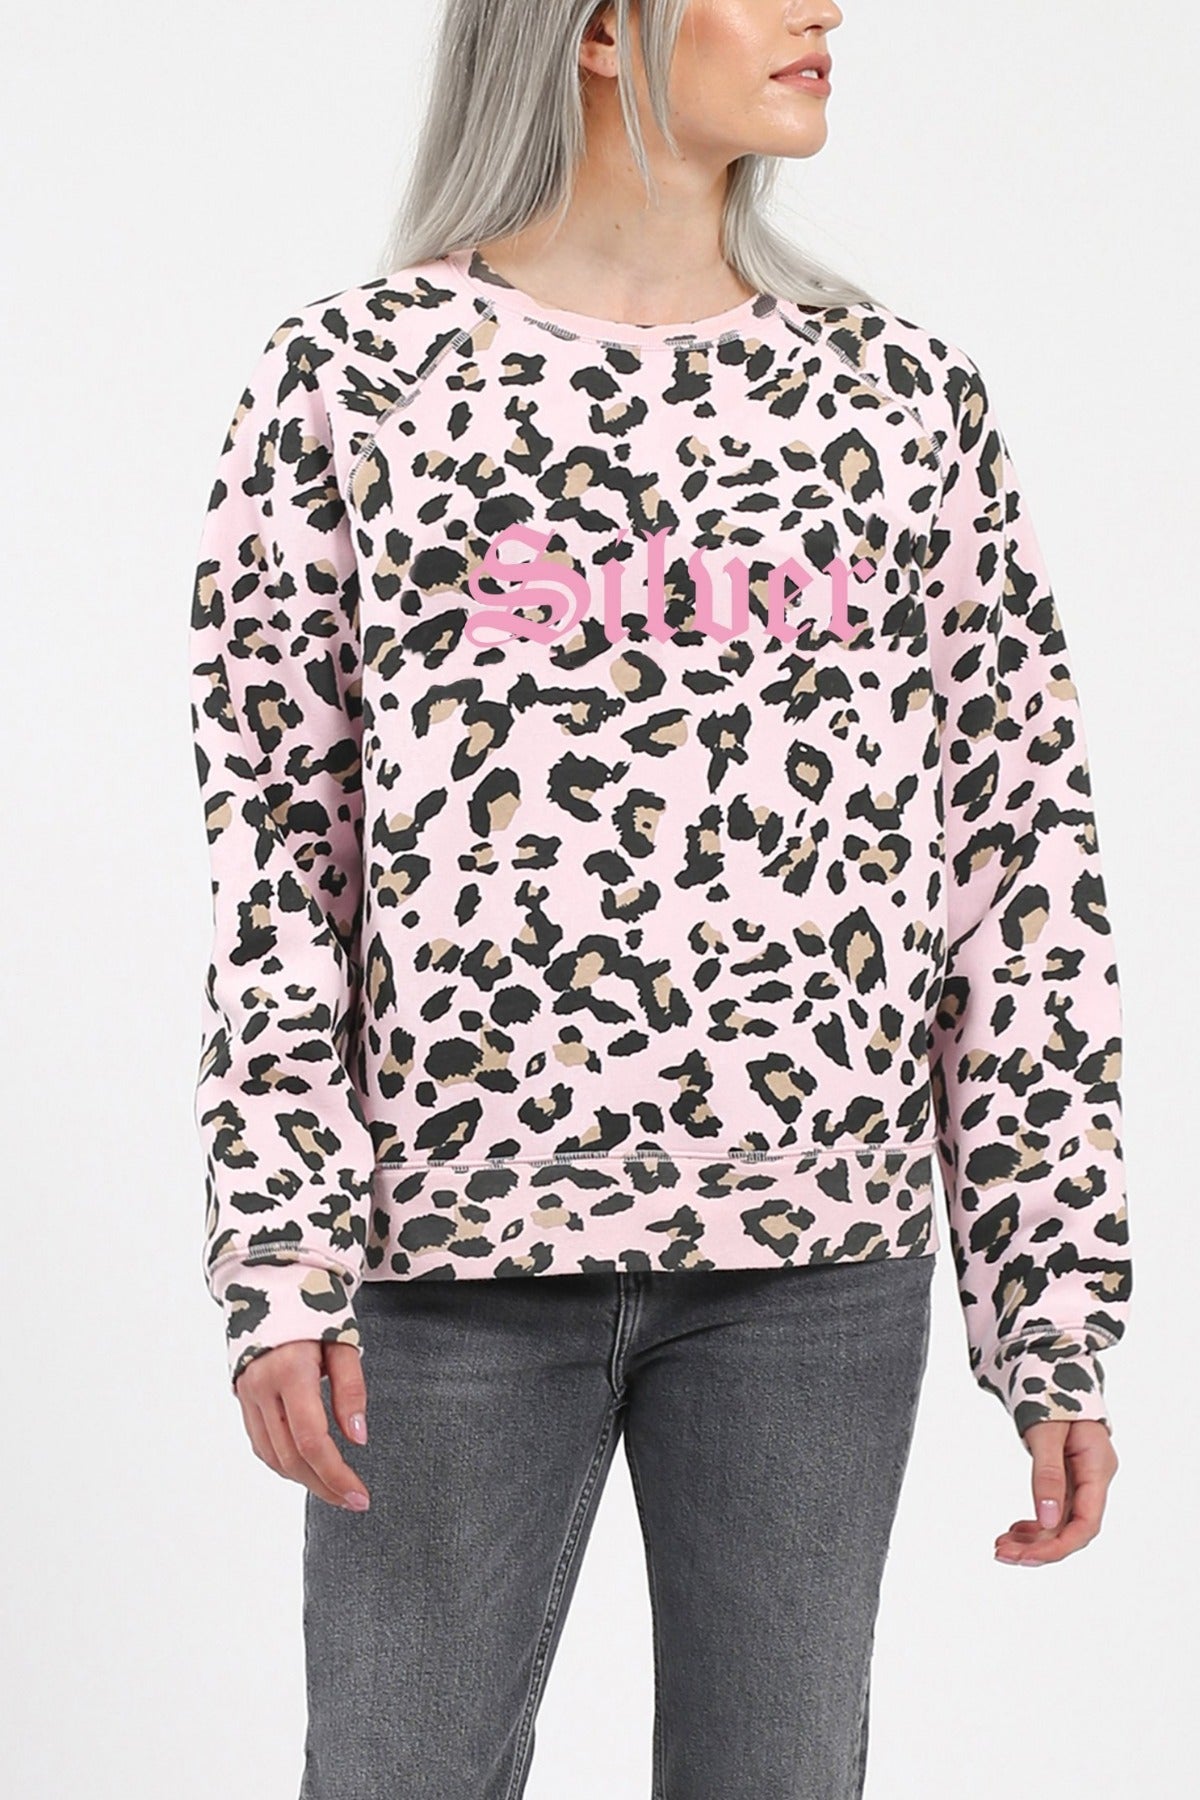 The "SILVER" Pink Leopard Middle Sister Crew Neck Sweatshirt